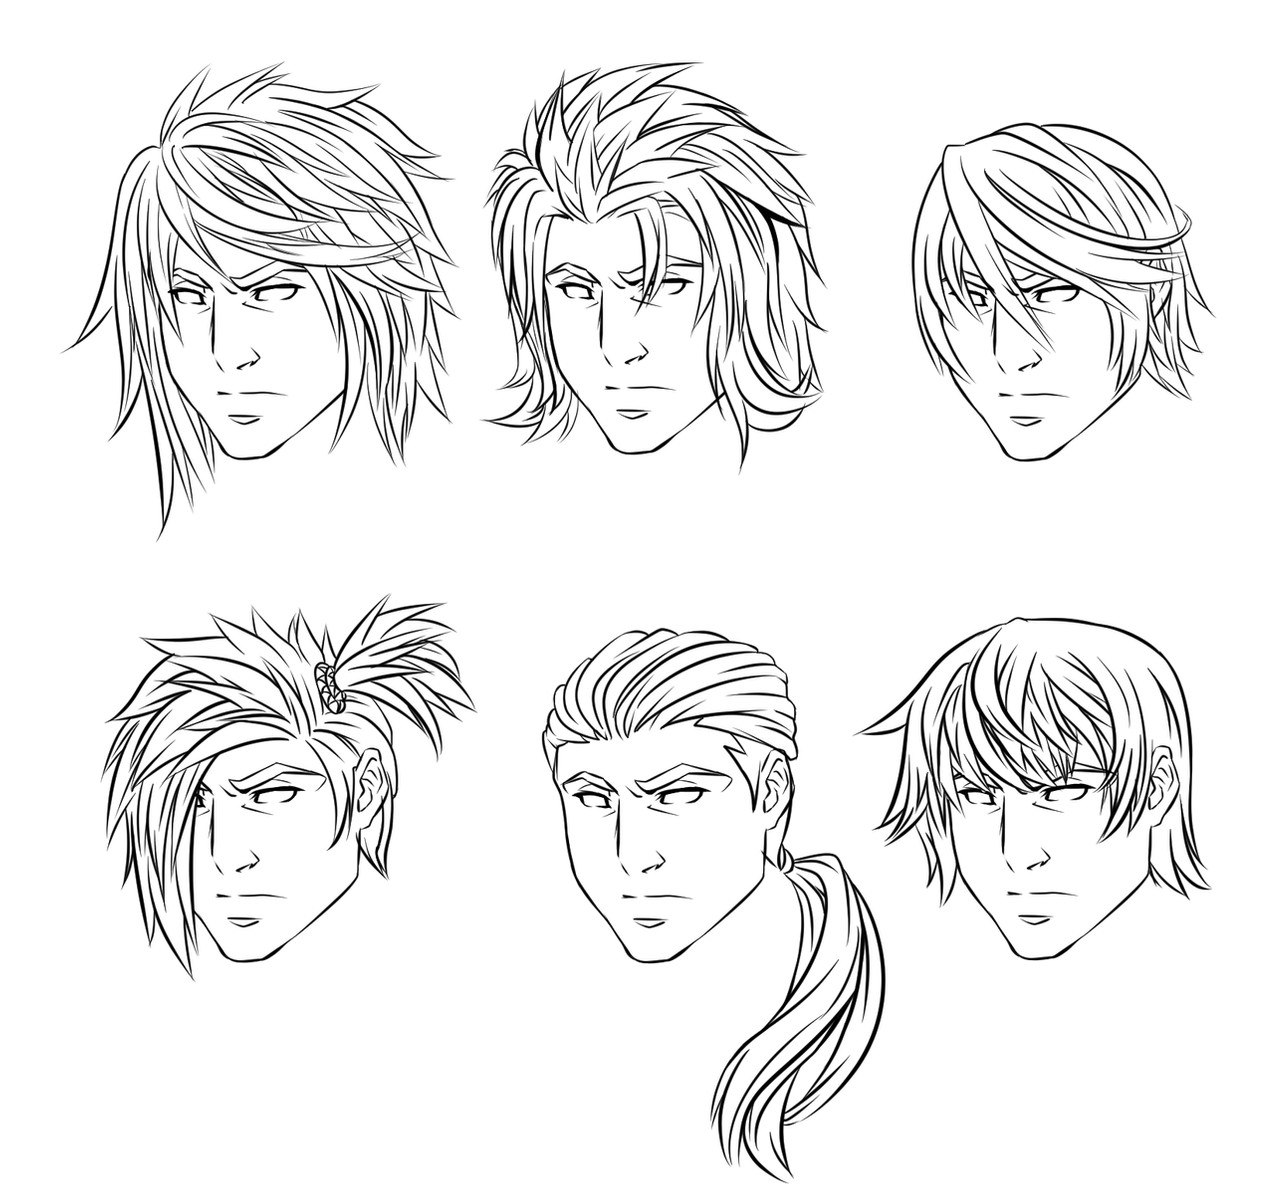 Anime Male Hairstyle
 Anime Male Hairstyles by CrimsonCypher on DeviantArt